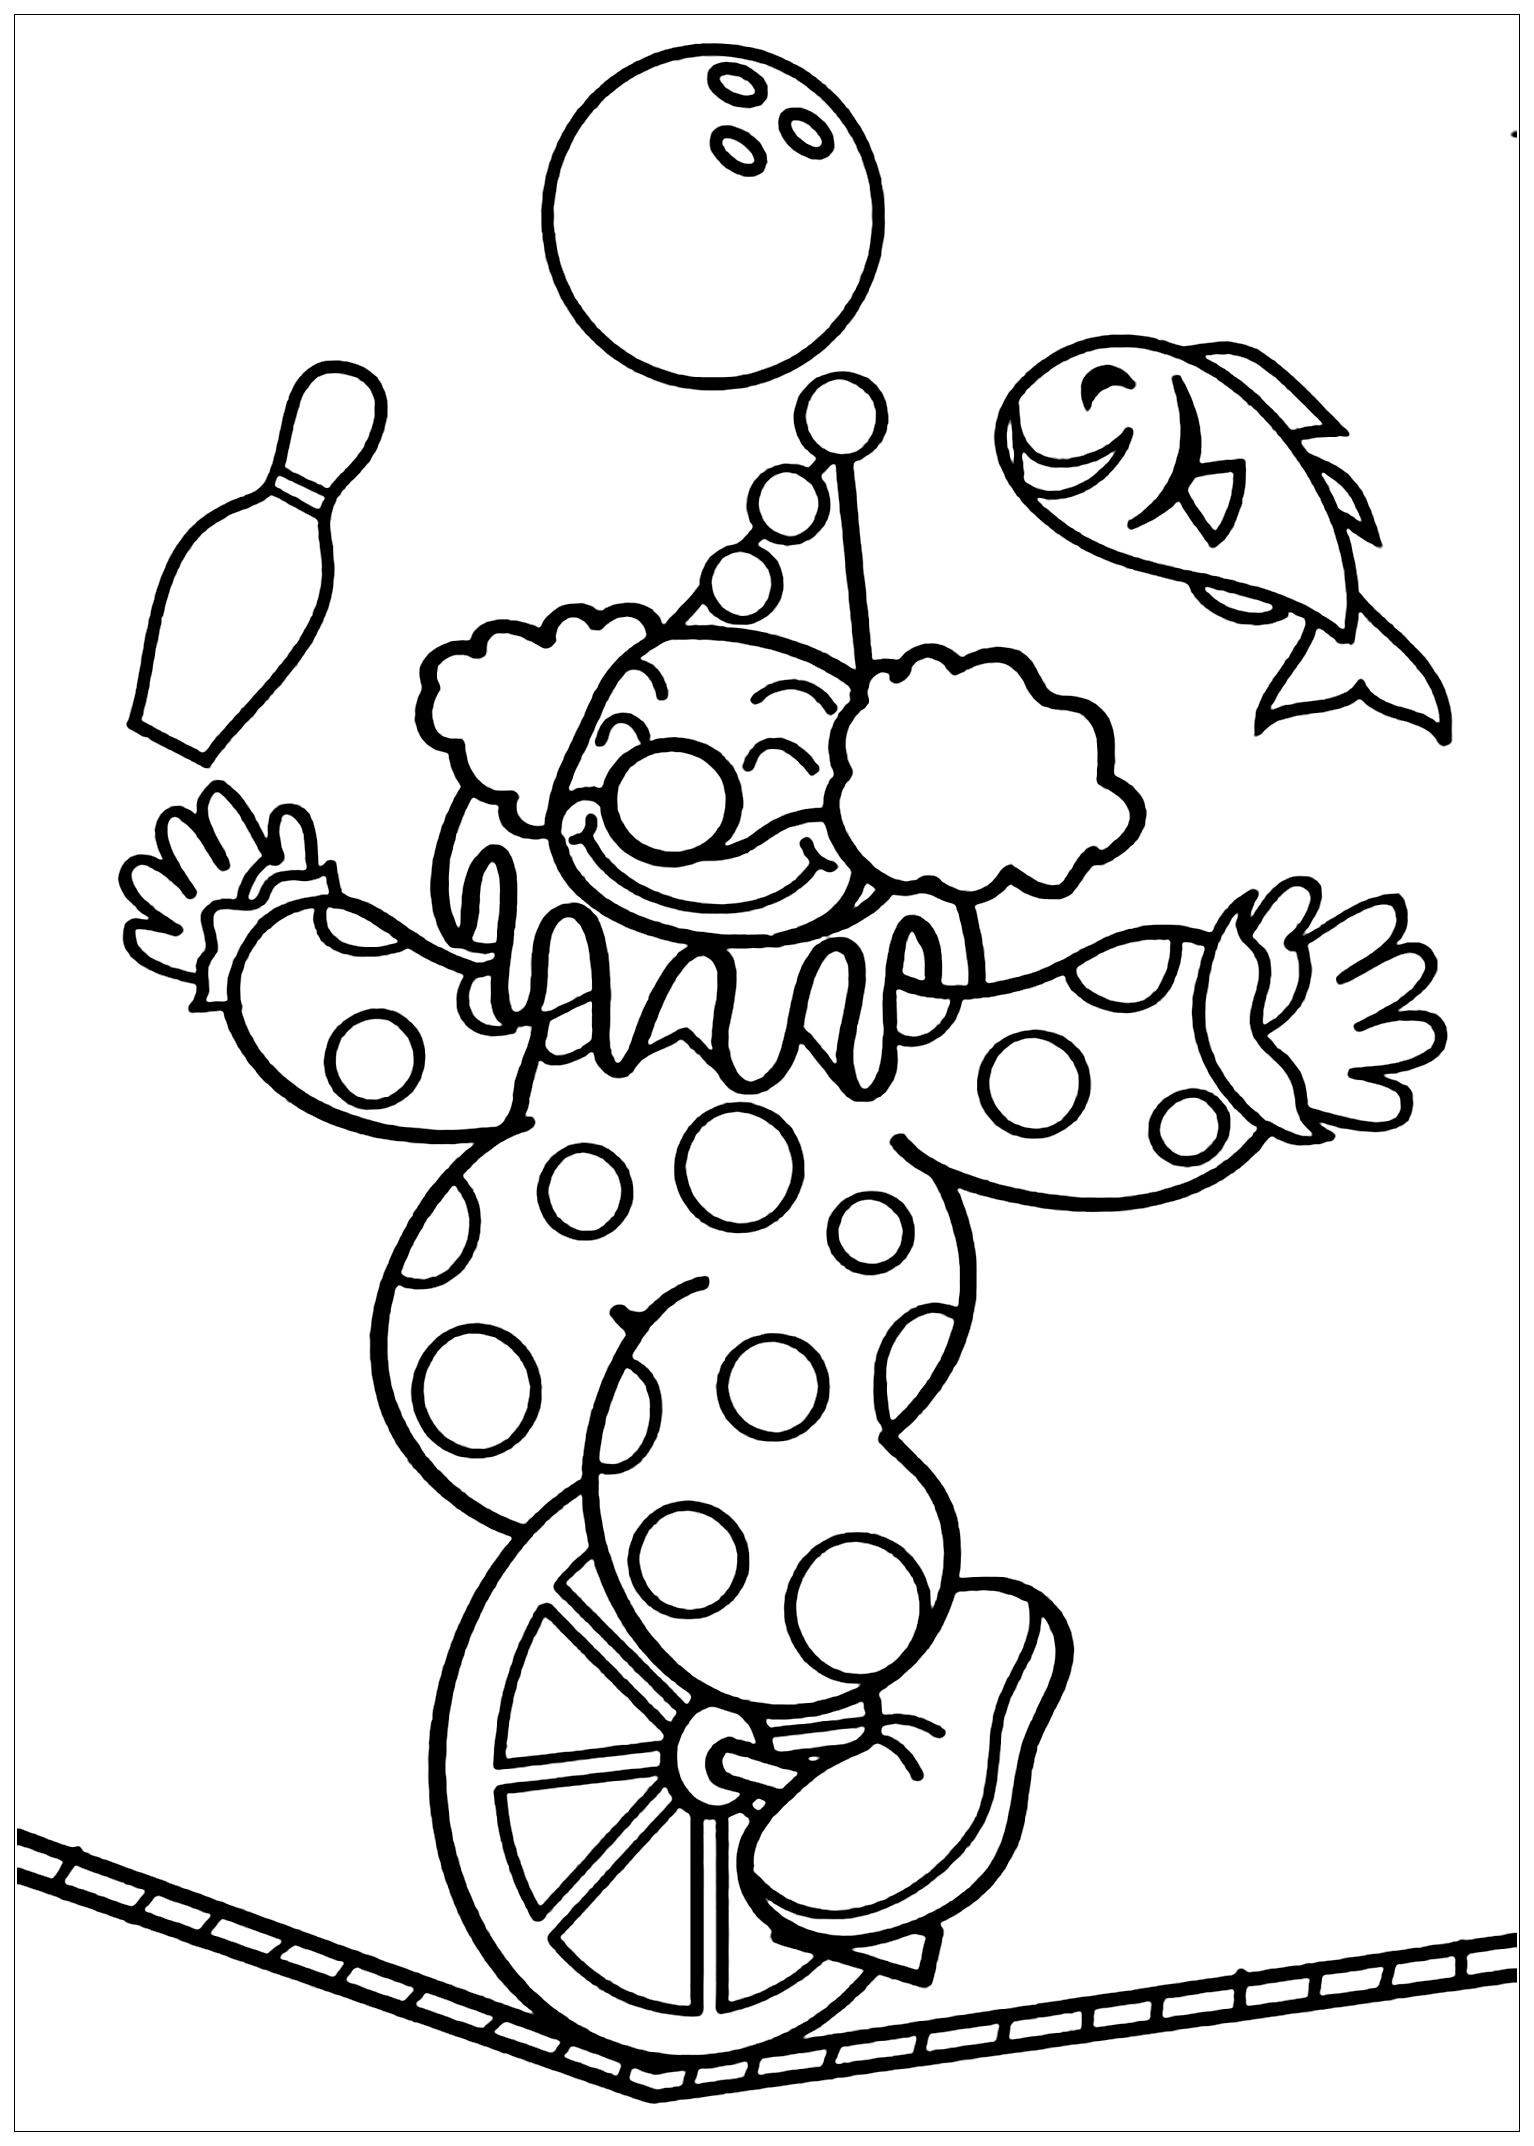 circus-coloring-pages-for-kids-circus-kids-coloring-pages